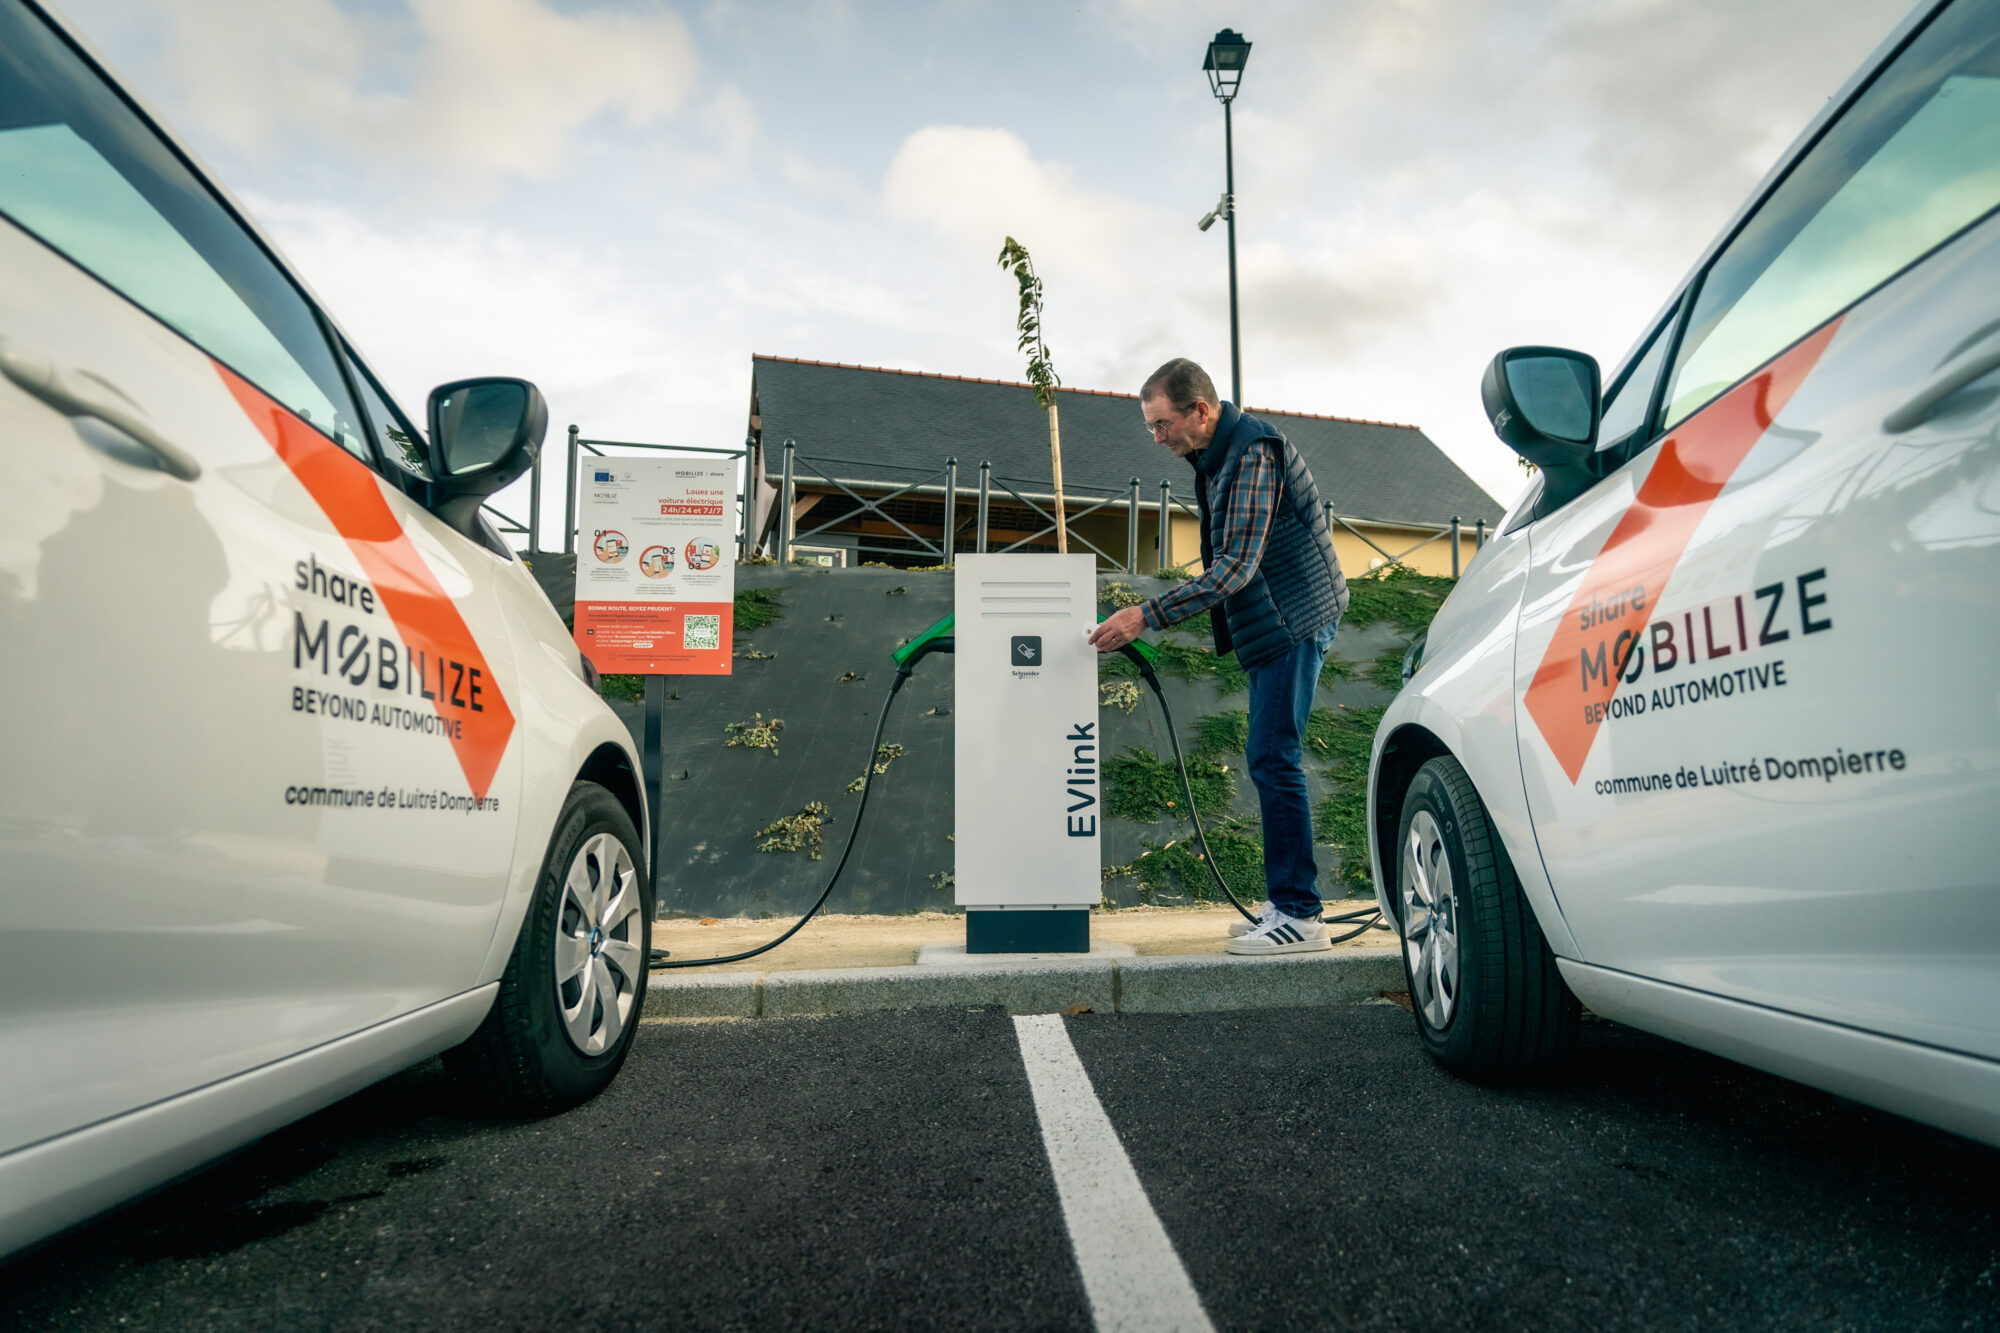 2021 - Story Mobilize - Rural communities adopting shared electric mobility solutions